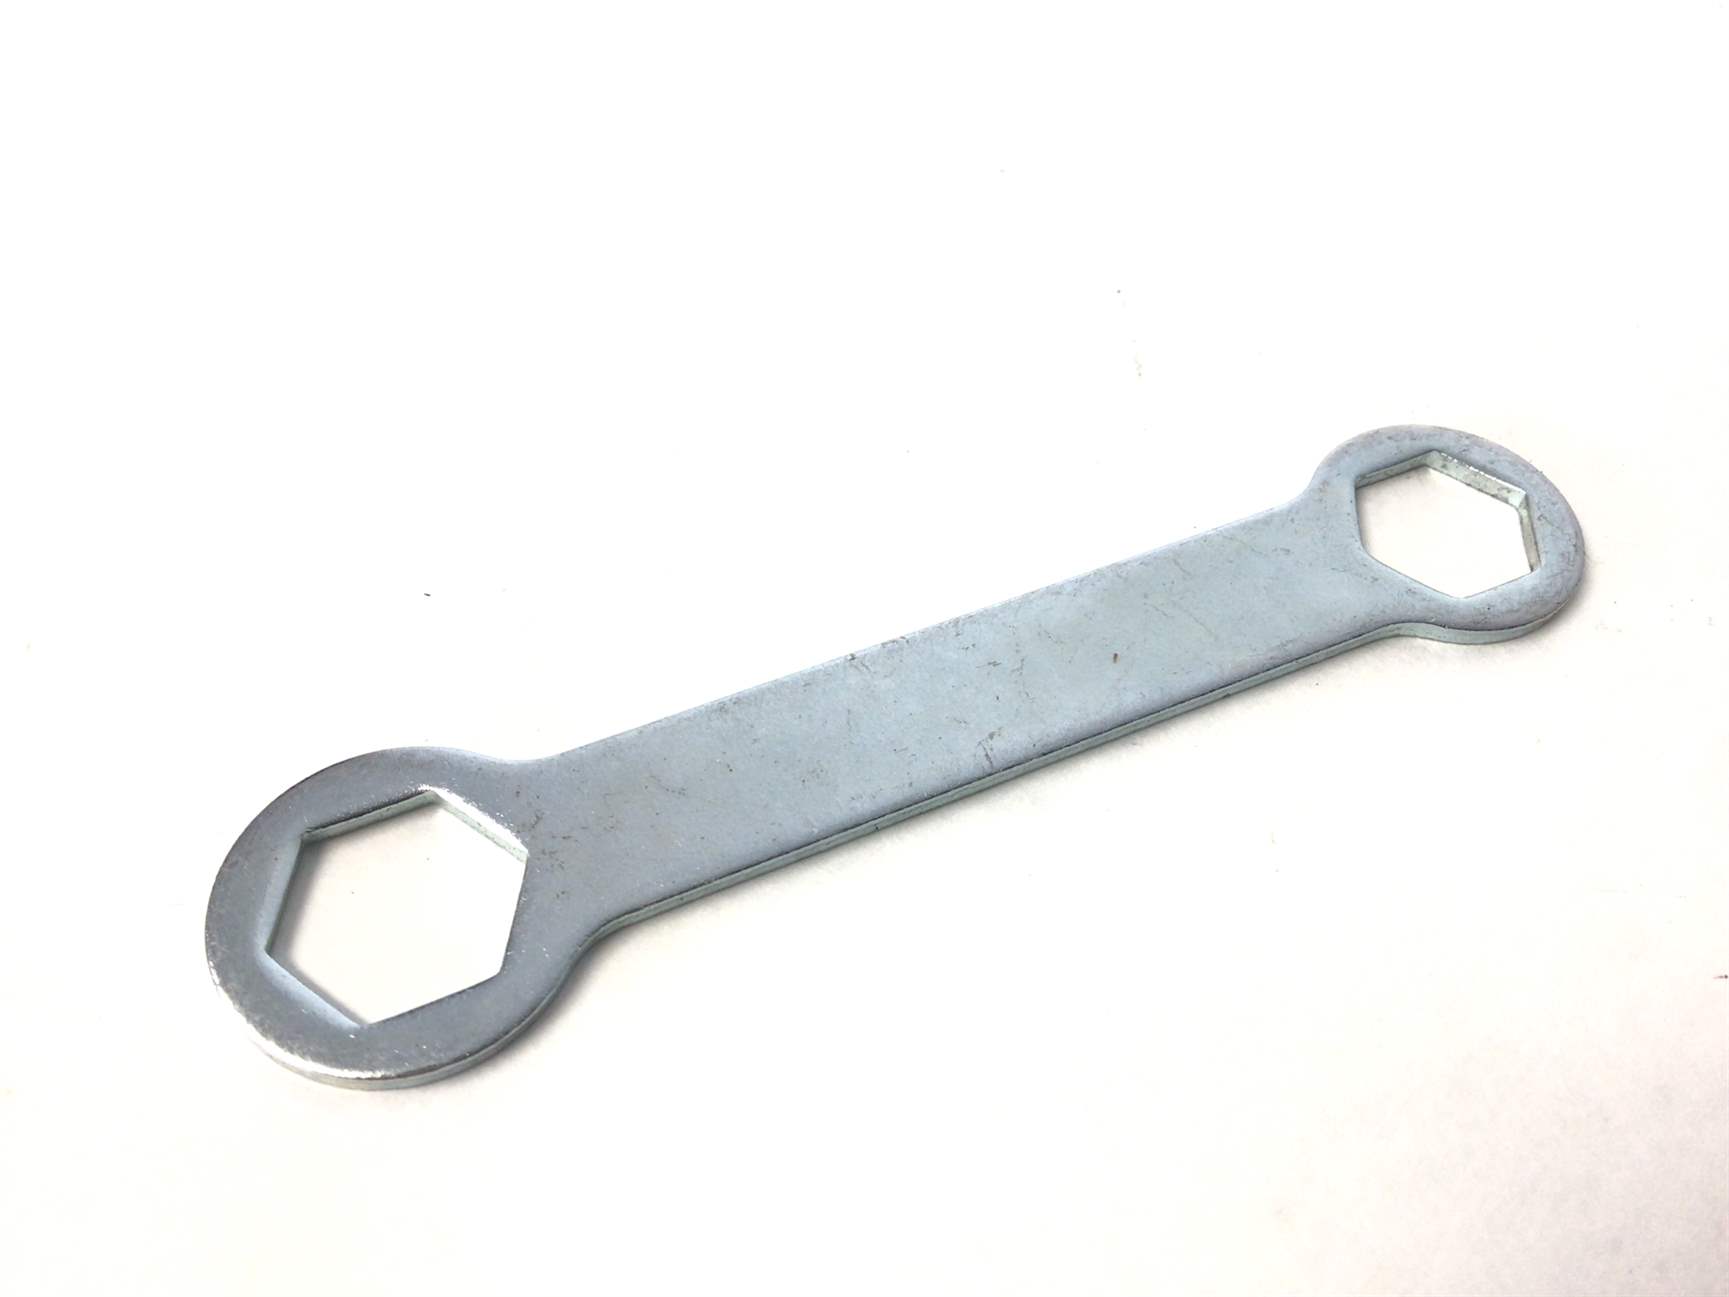 Assembly Wrench (Used)